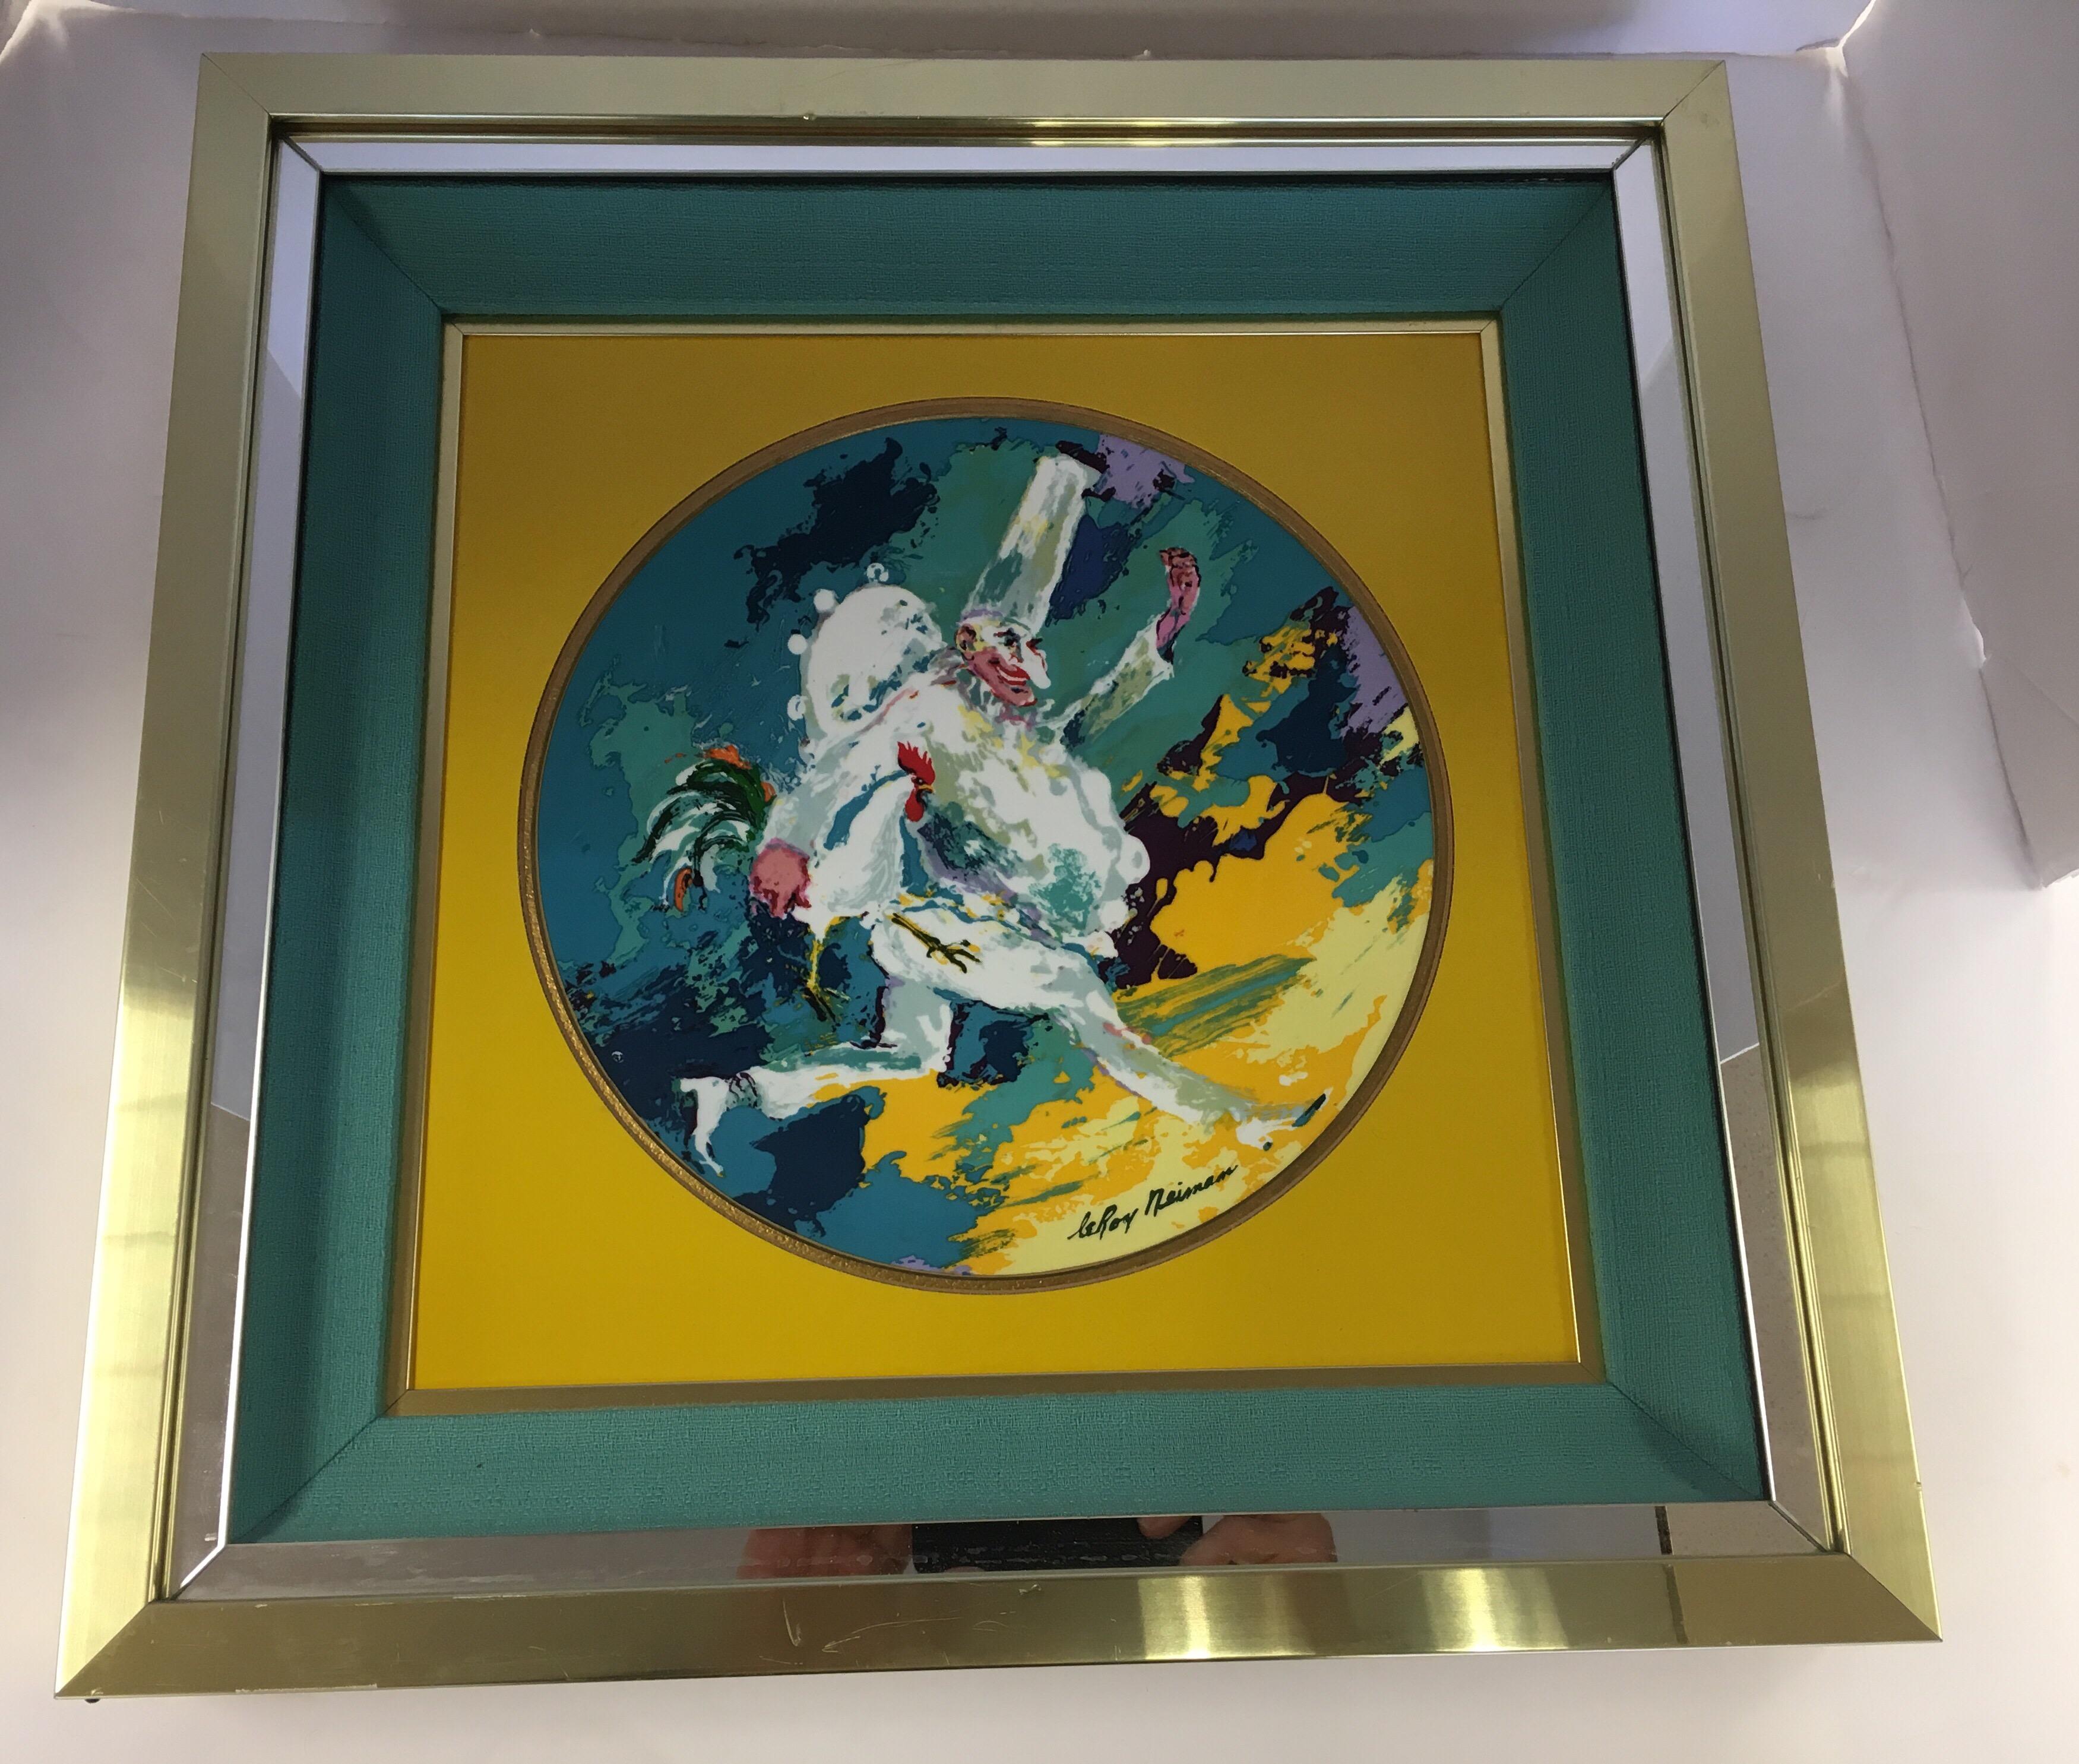 Rare Leroy Neiman limited edition collectors plate in a midcentury custom frame.
Title of plate is Punchinello and it is #8550 of 15,000.